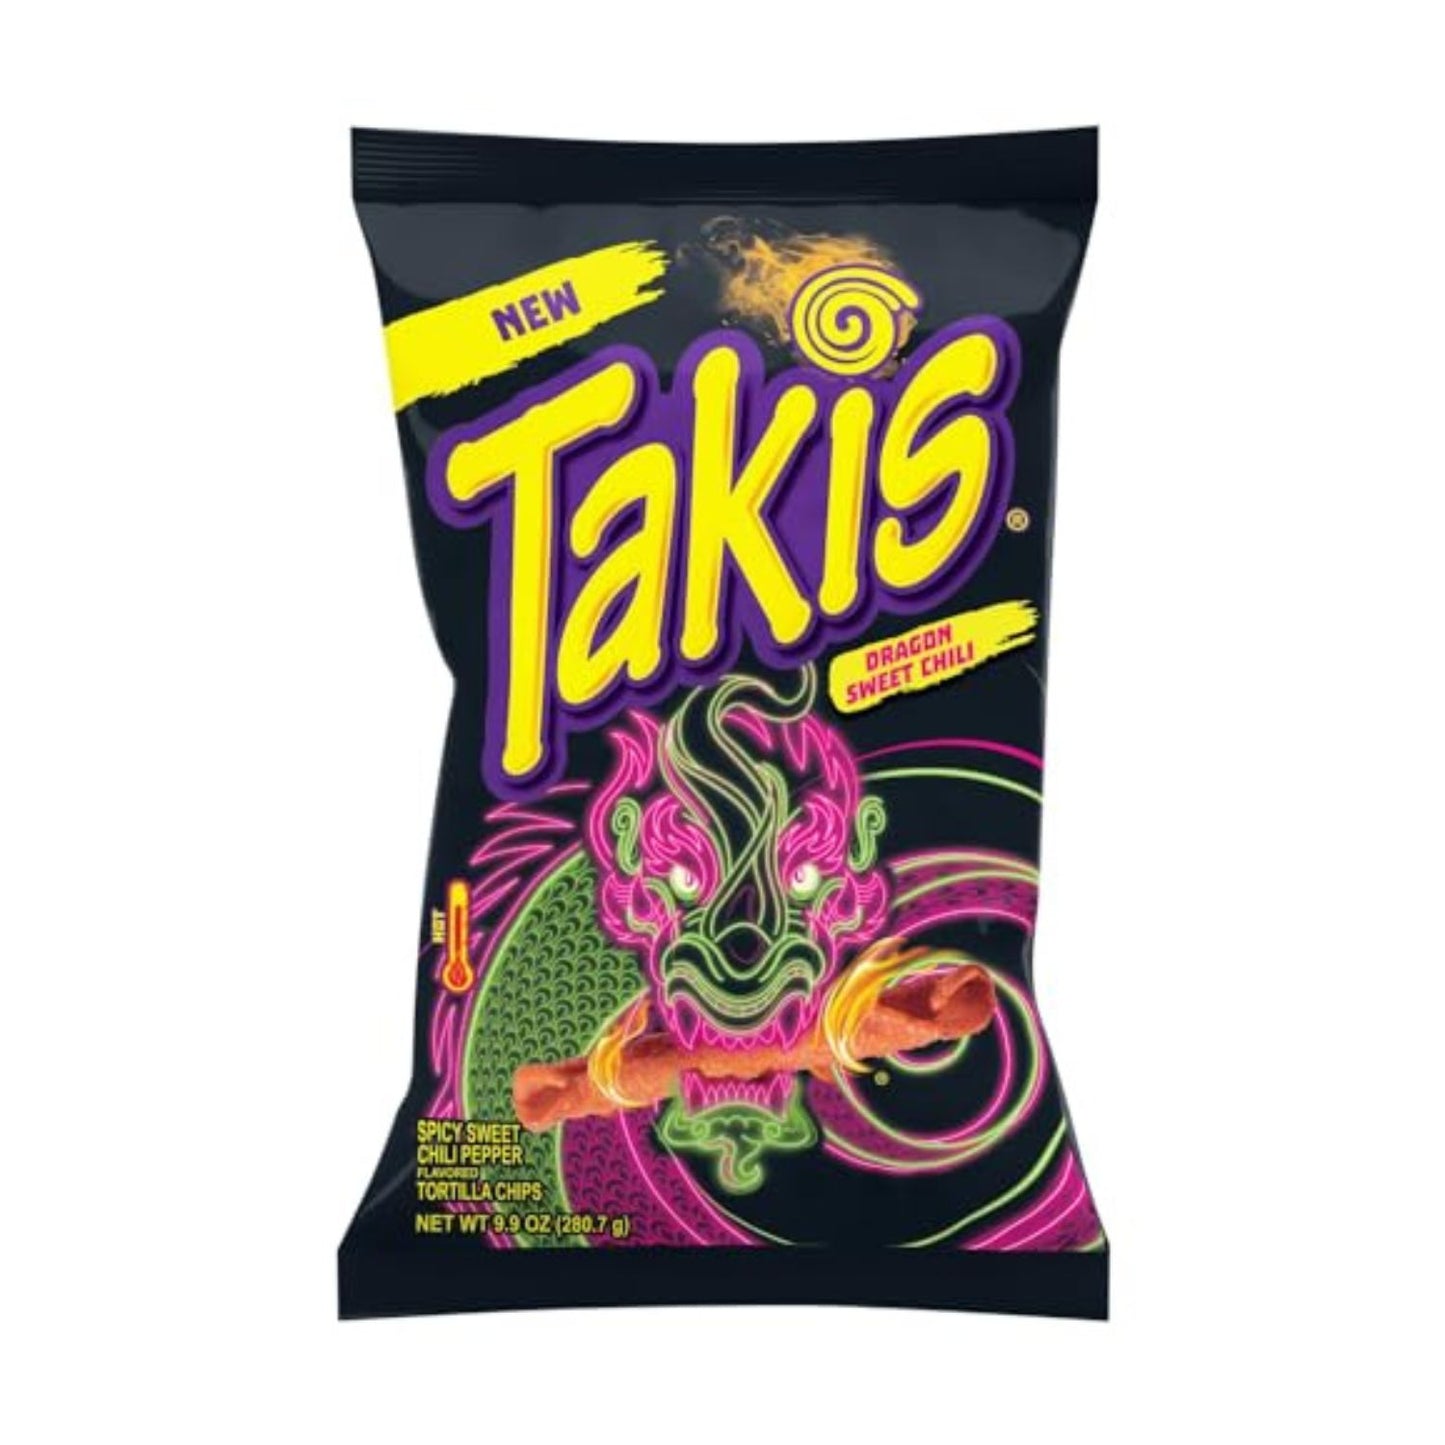 Takis Dragon Spicy Sweet Chili Pepper pack of 1